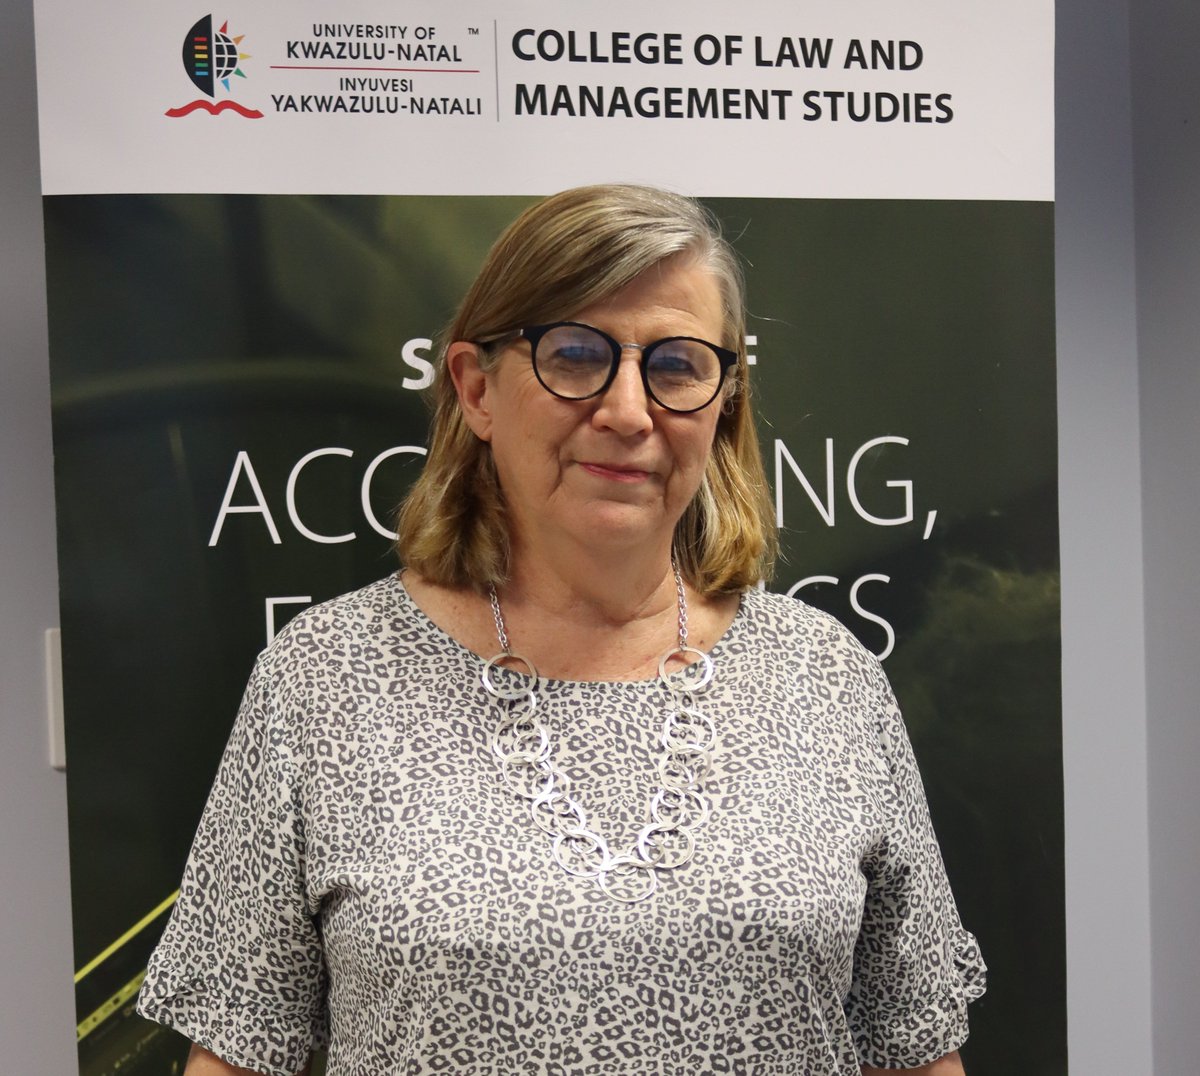 Dr Patricia Shewell, senior lecturer in @UKZN School of Accounting, Economics and Finance, is the recipient of a Chartered Institute of Management Accountants (CIMA) Teaching Excellence Award 2022.
#InspiringGreatness #MyUKZN Read more: bit.ly/3LnoYrA